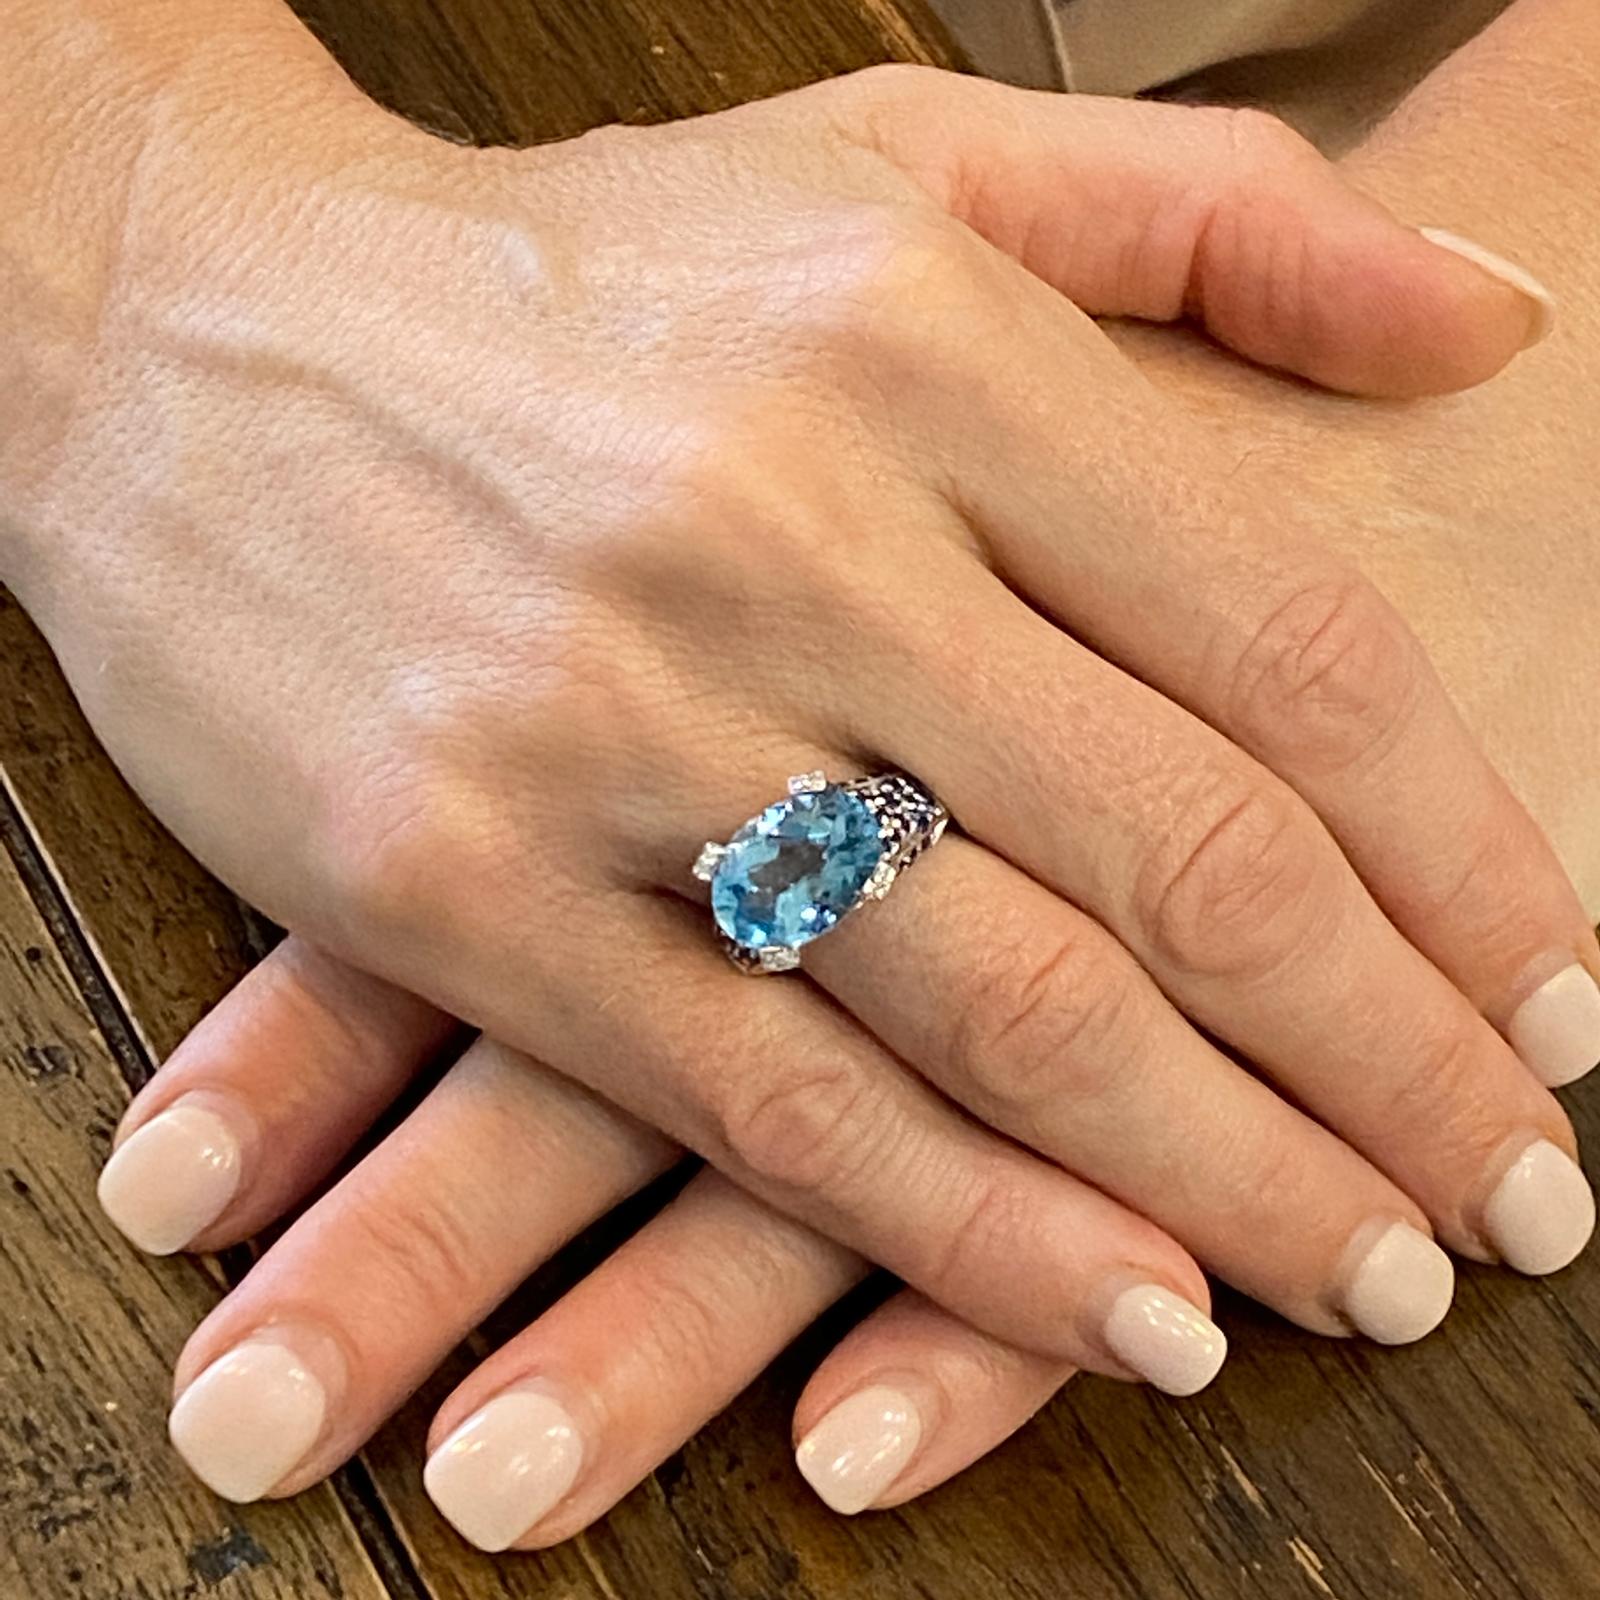 Diamond, blue topaz, and sapphire ring fashioned in 14 karat white gold. Designed by Le Vian, the ring features an approximately 6.00 carat oval faceted blue topaz gemstone set with 20 round brilliant cut diamonds and 50 blue sapphire accents. The